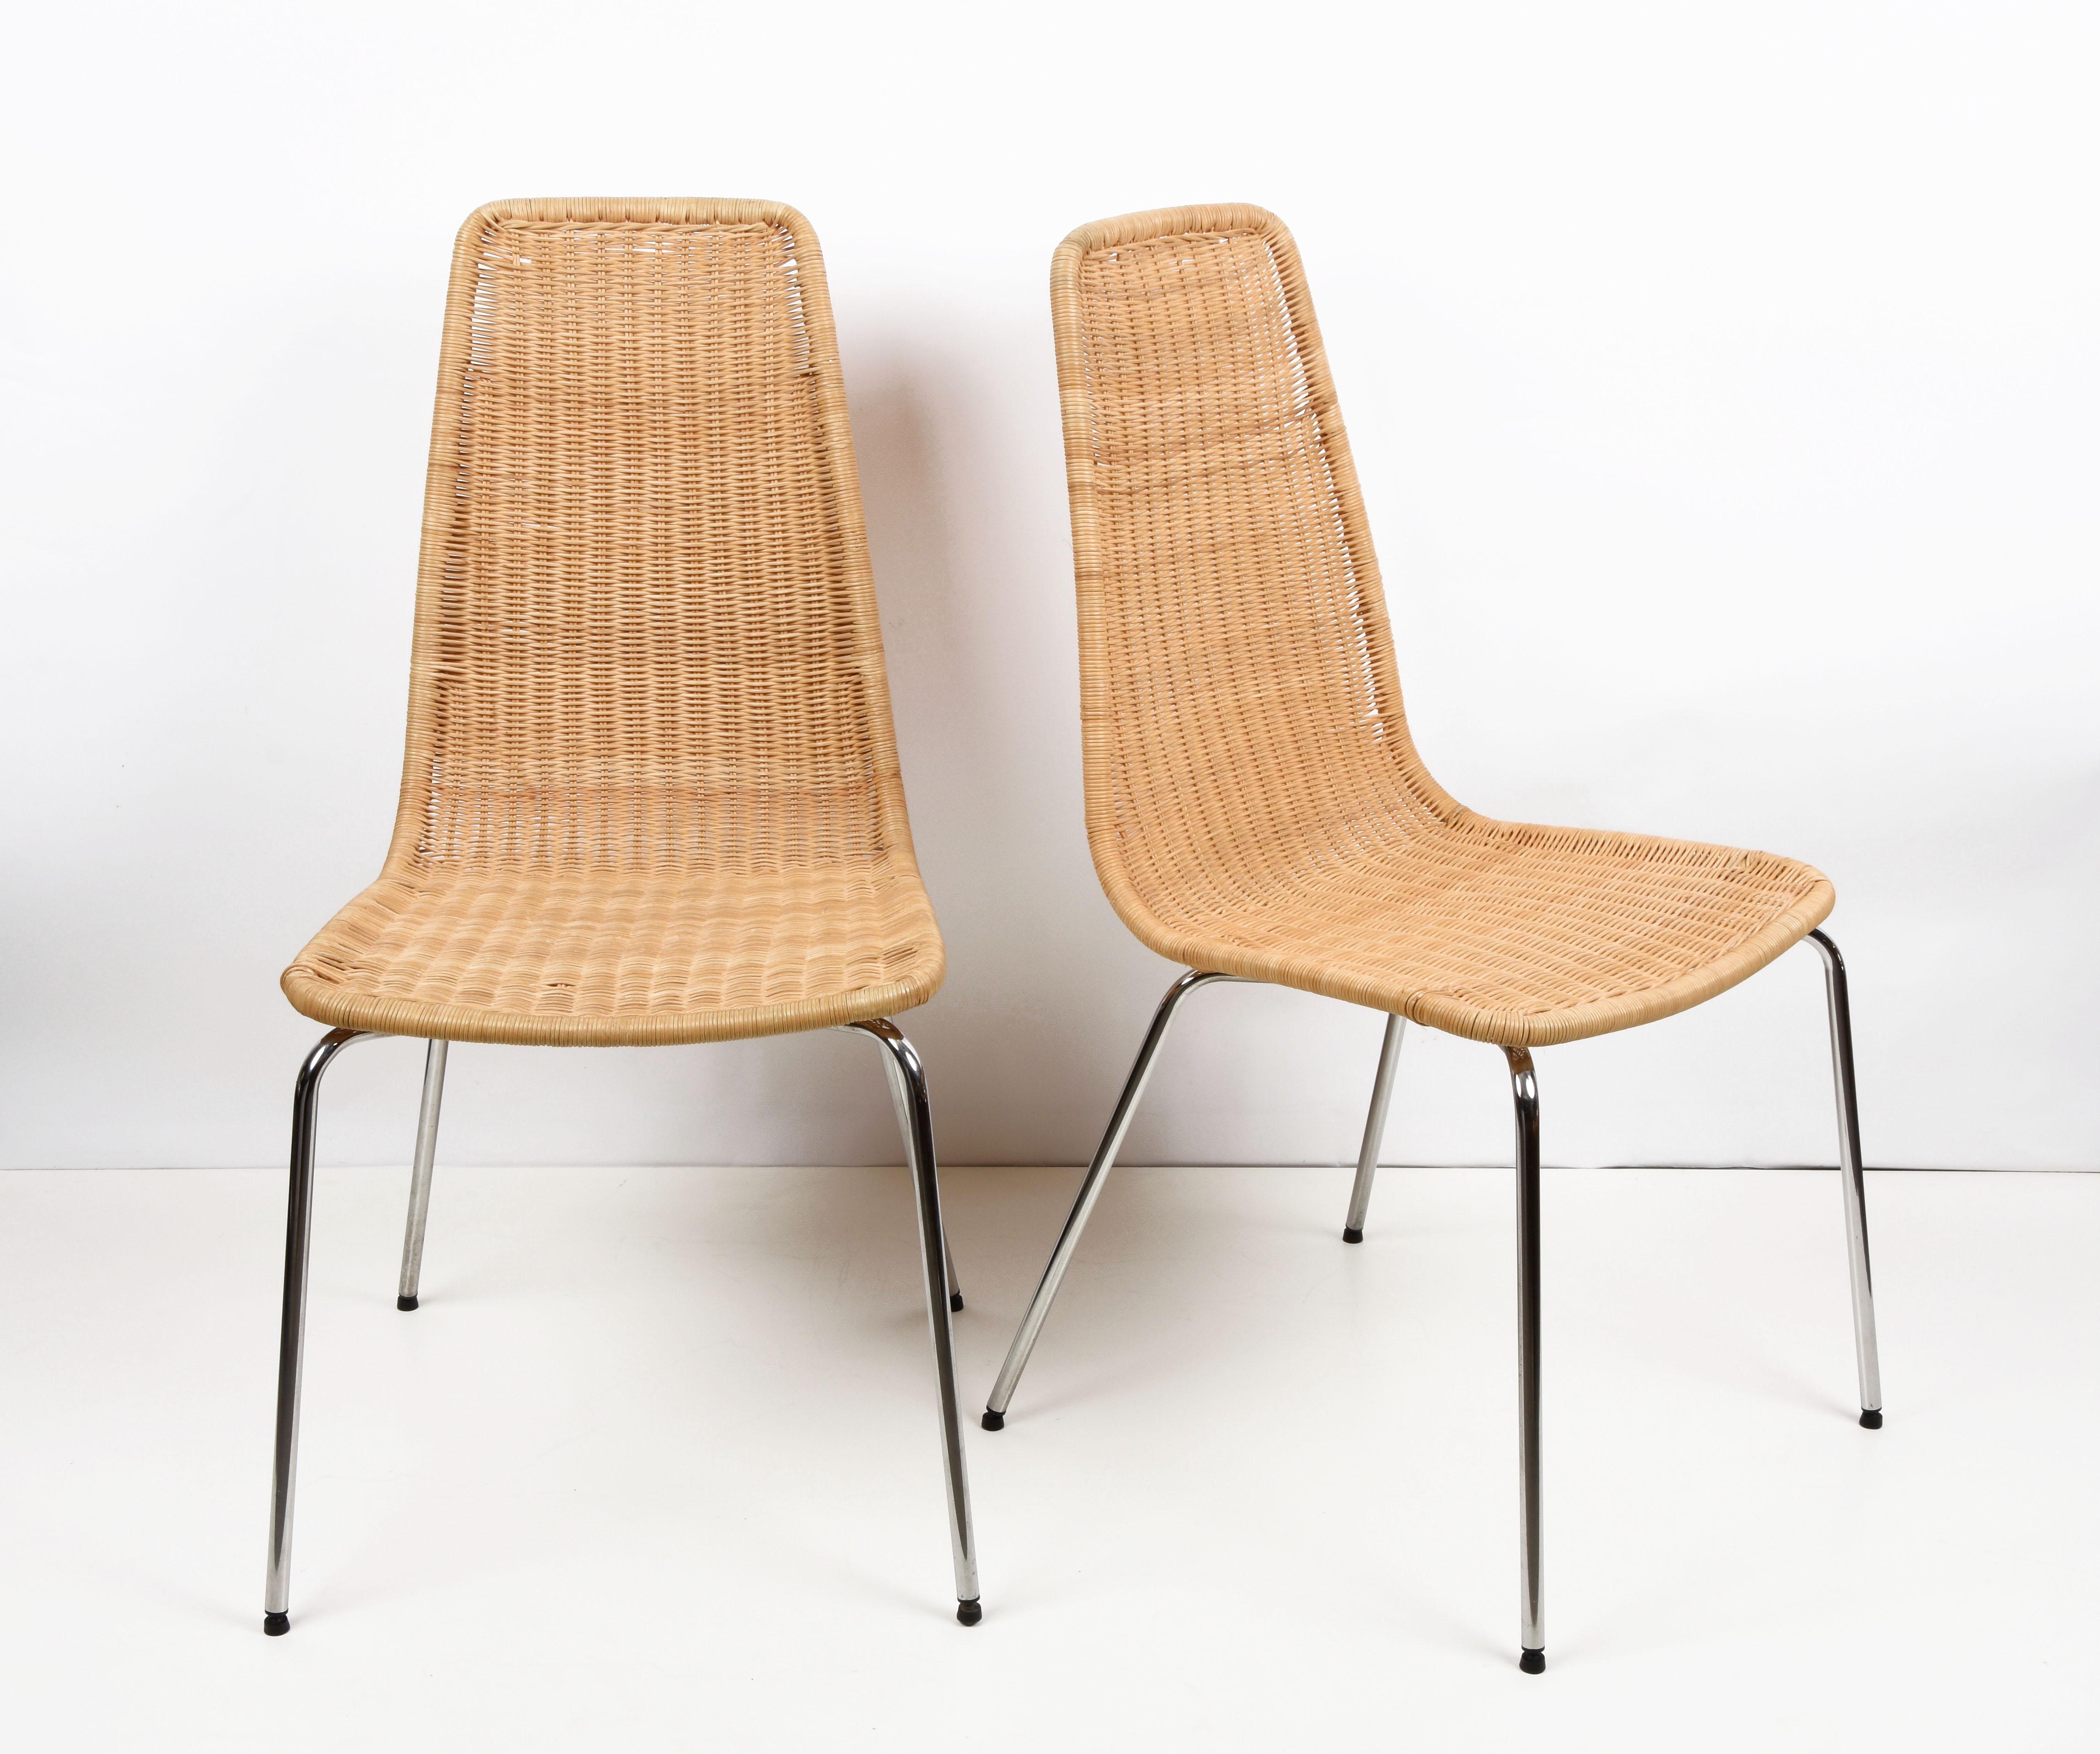 Midcentury Chromed Metal with Removable Rattan and Wicker Italian Chairs, 1970s In Good Condition For Sale In Roma, IT